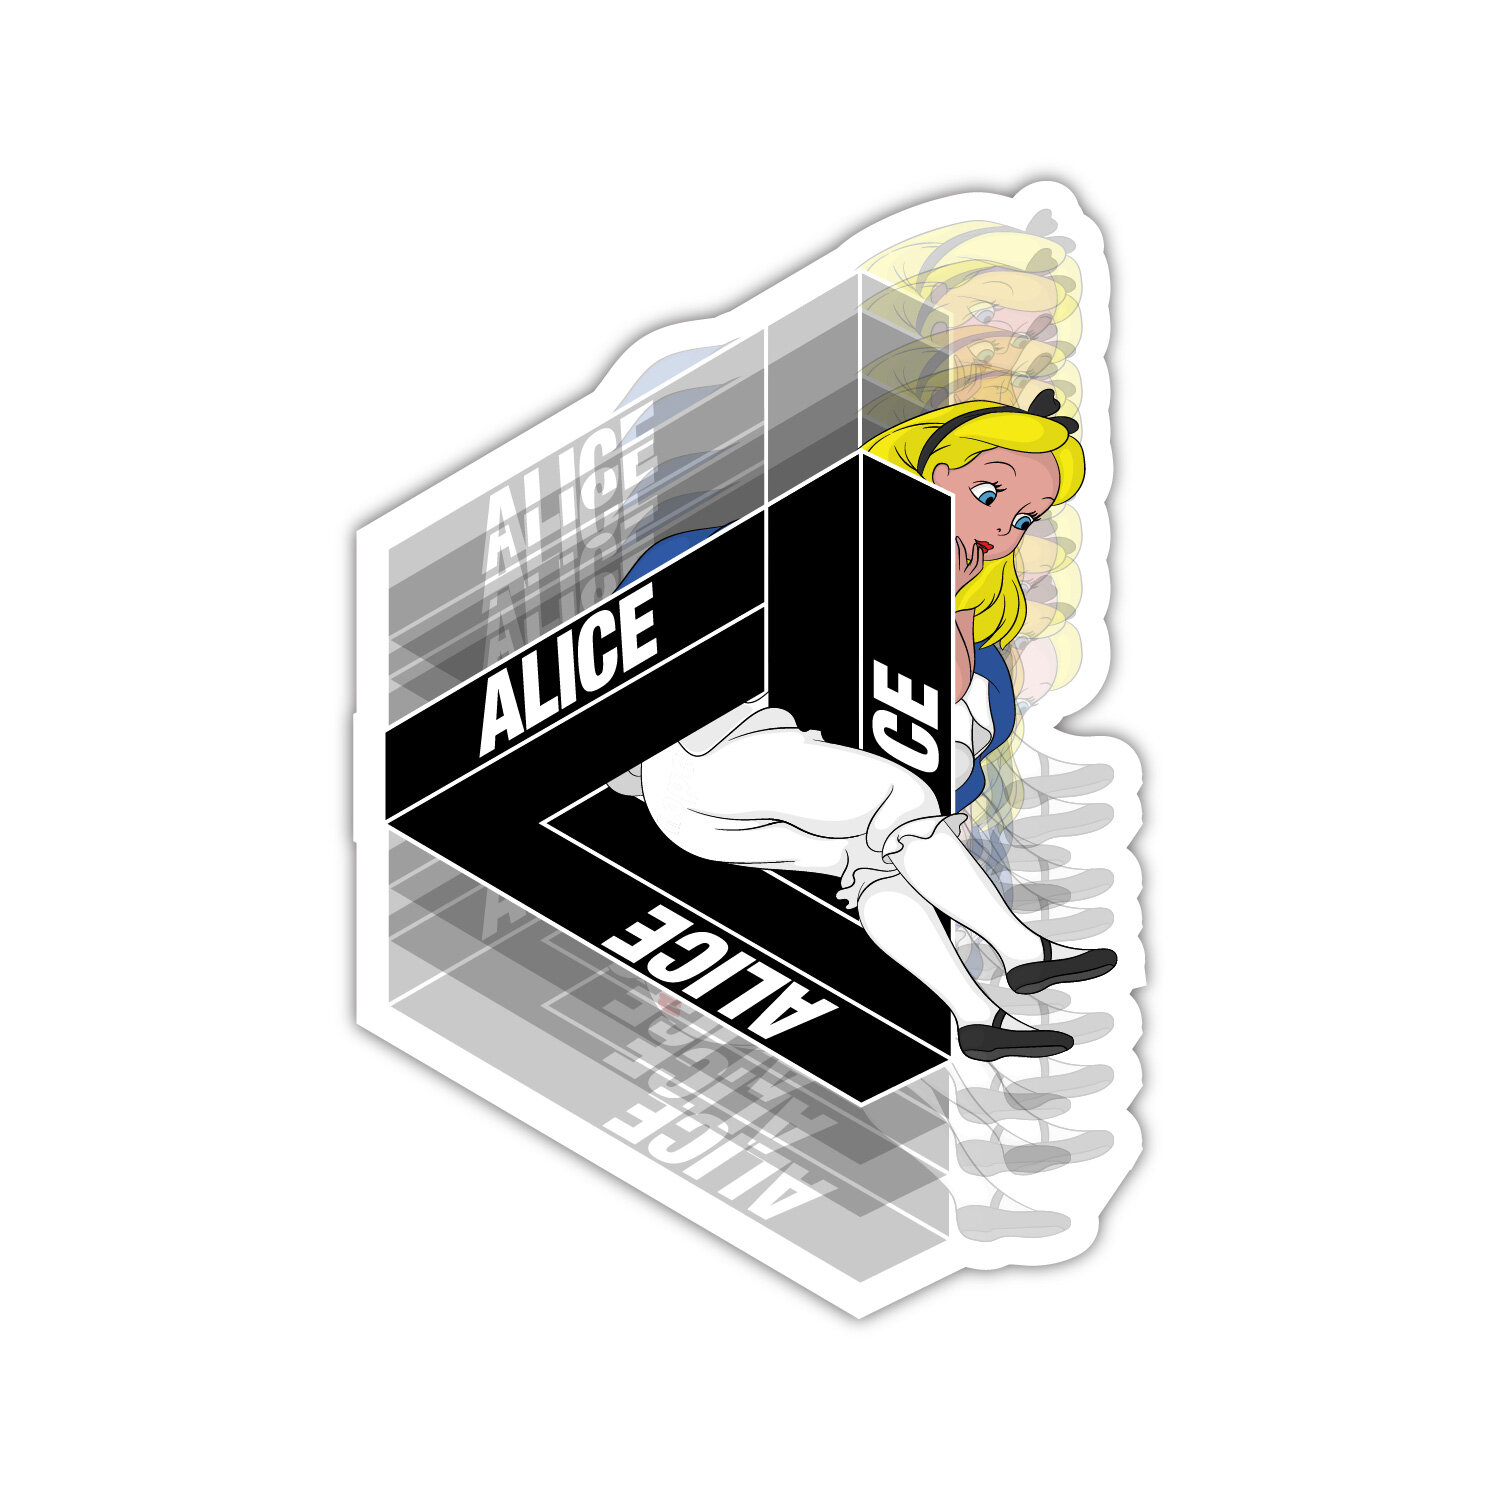 Alice_In_Palace_Sticker_Images-02.jpg